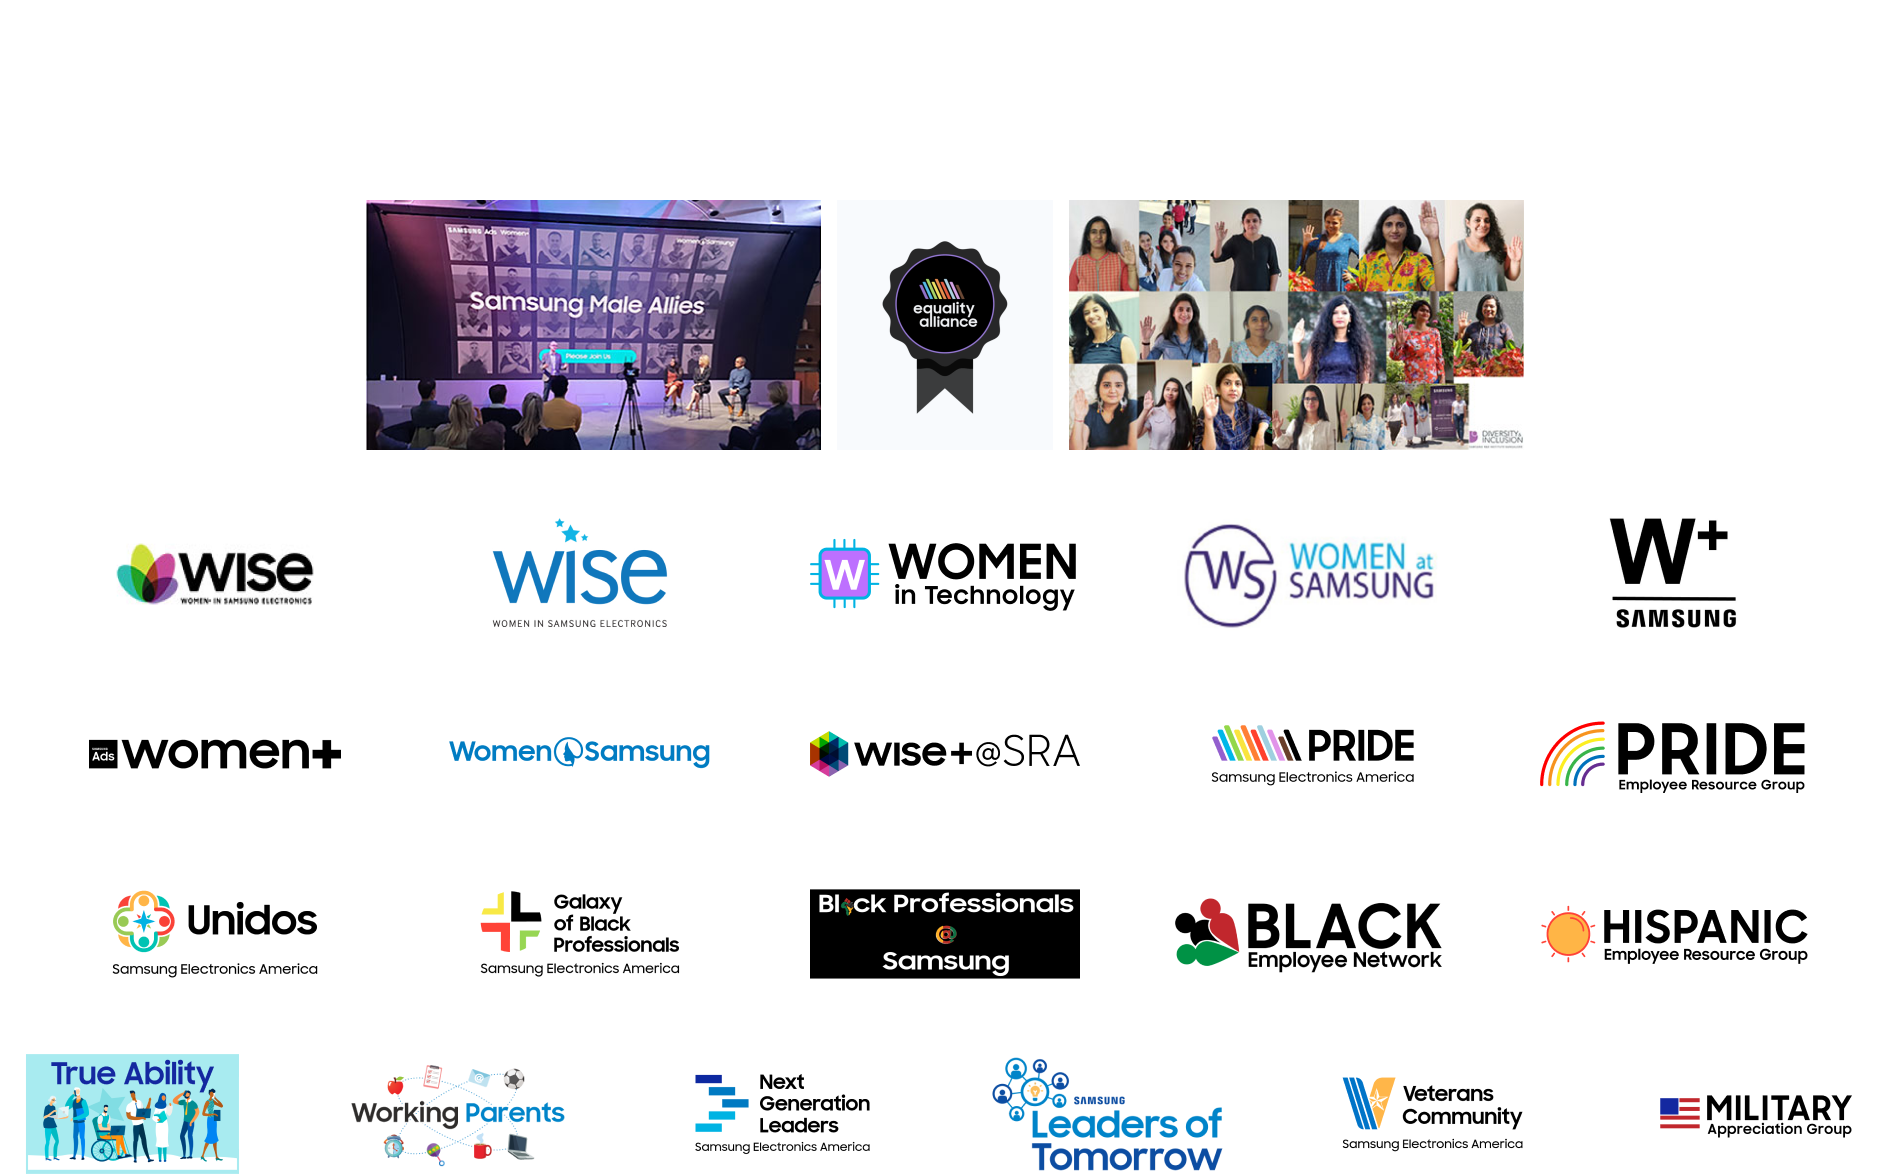 equality alliance, WISE, SAMSUNG x Leaders of Tommorw, Women Samsung, Working Parents, Galaxy of Black Professionals, W, Veterans Community, women+, True Ability, W+ samsung, Next Generation Leaders, unidos, MAG, Black Professionals Samsung, Women SAMSUNG